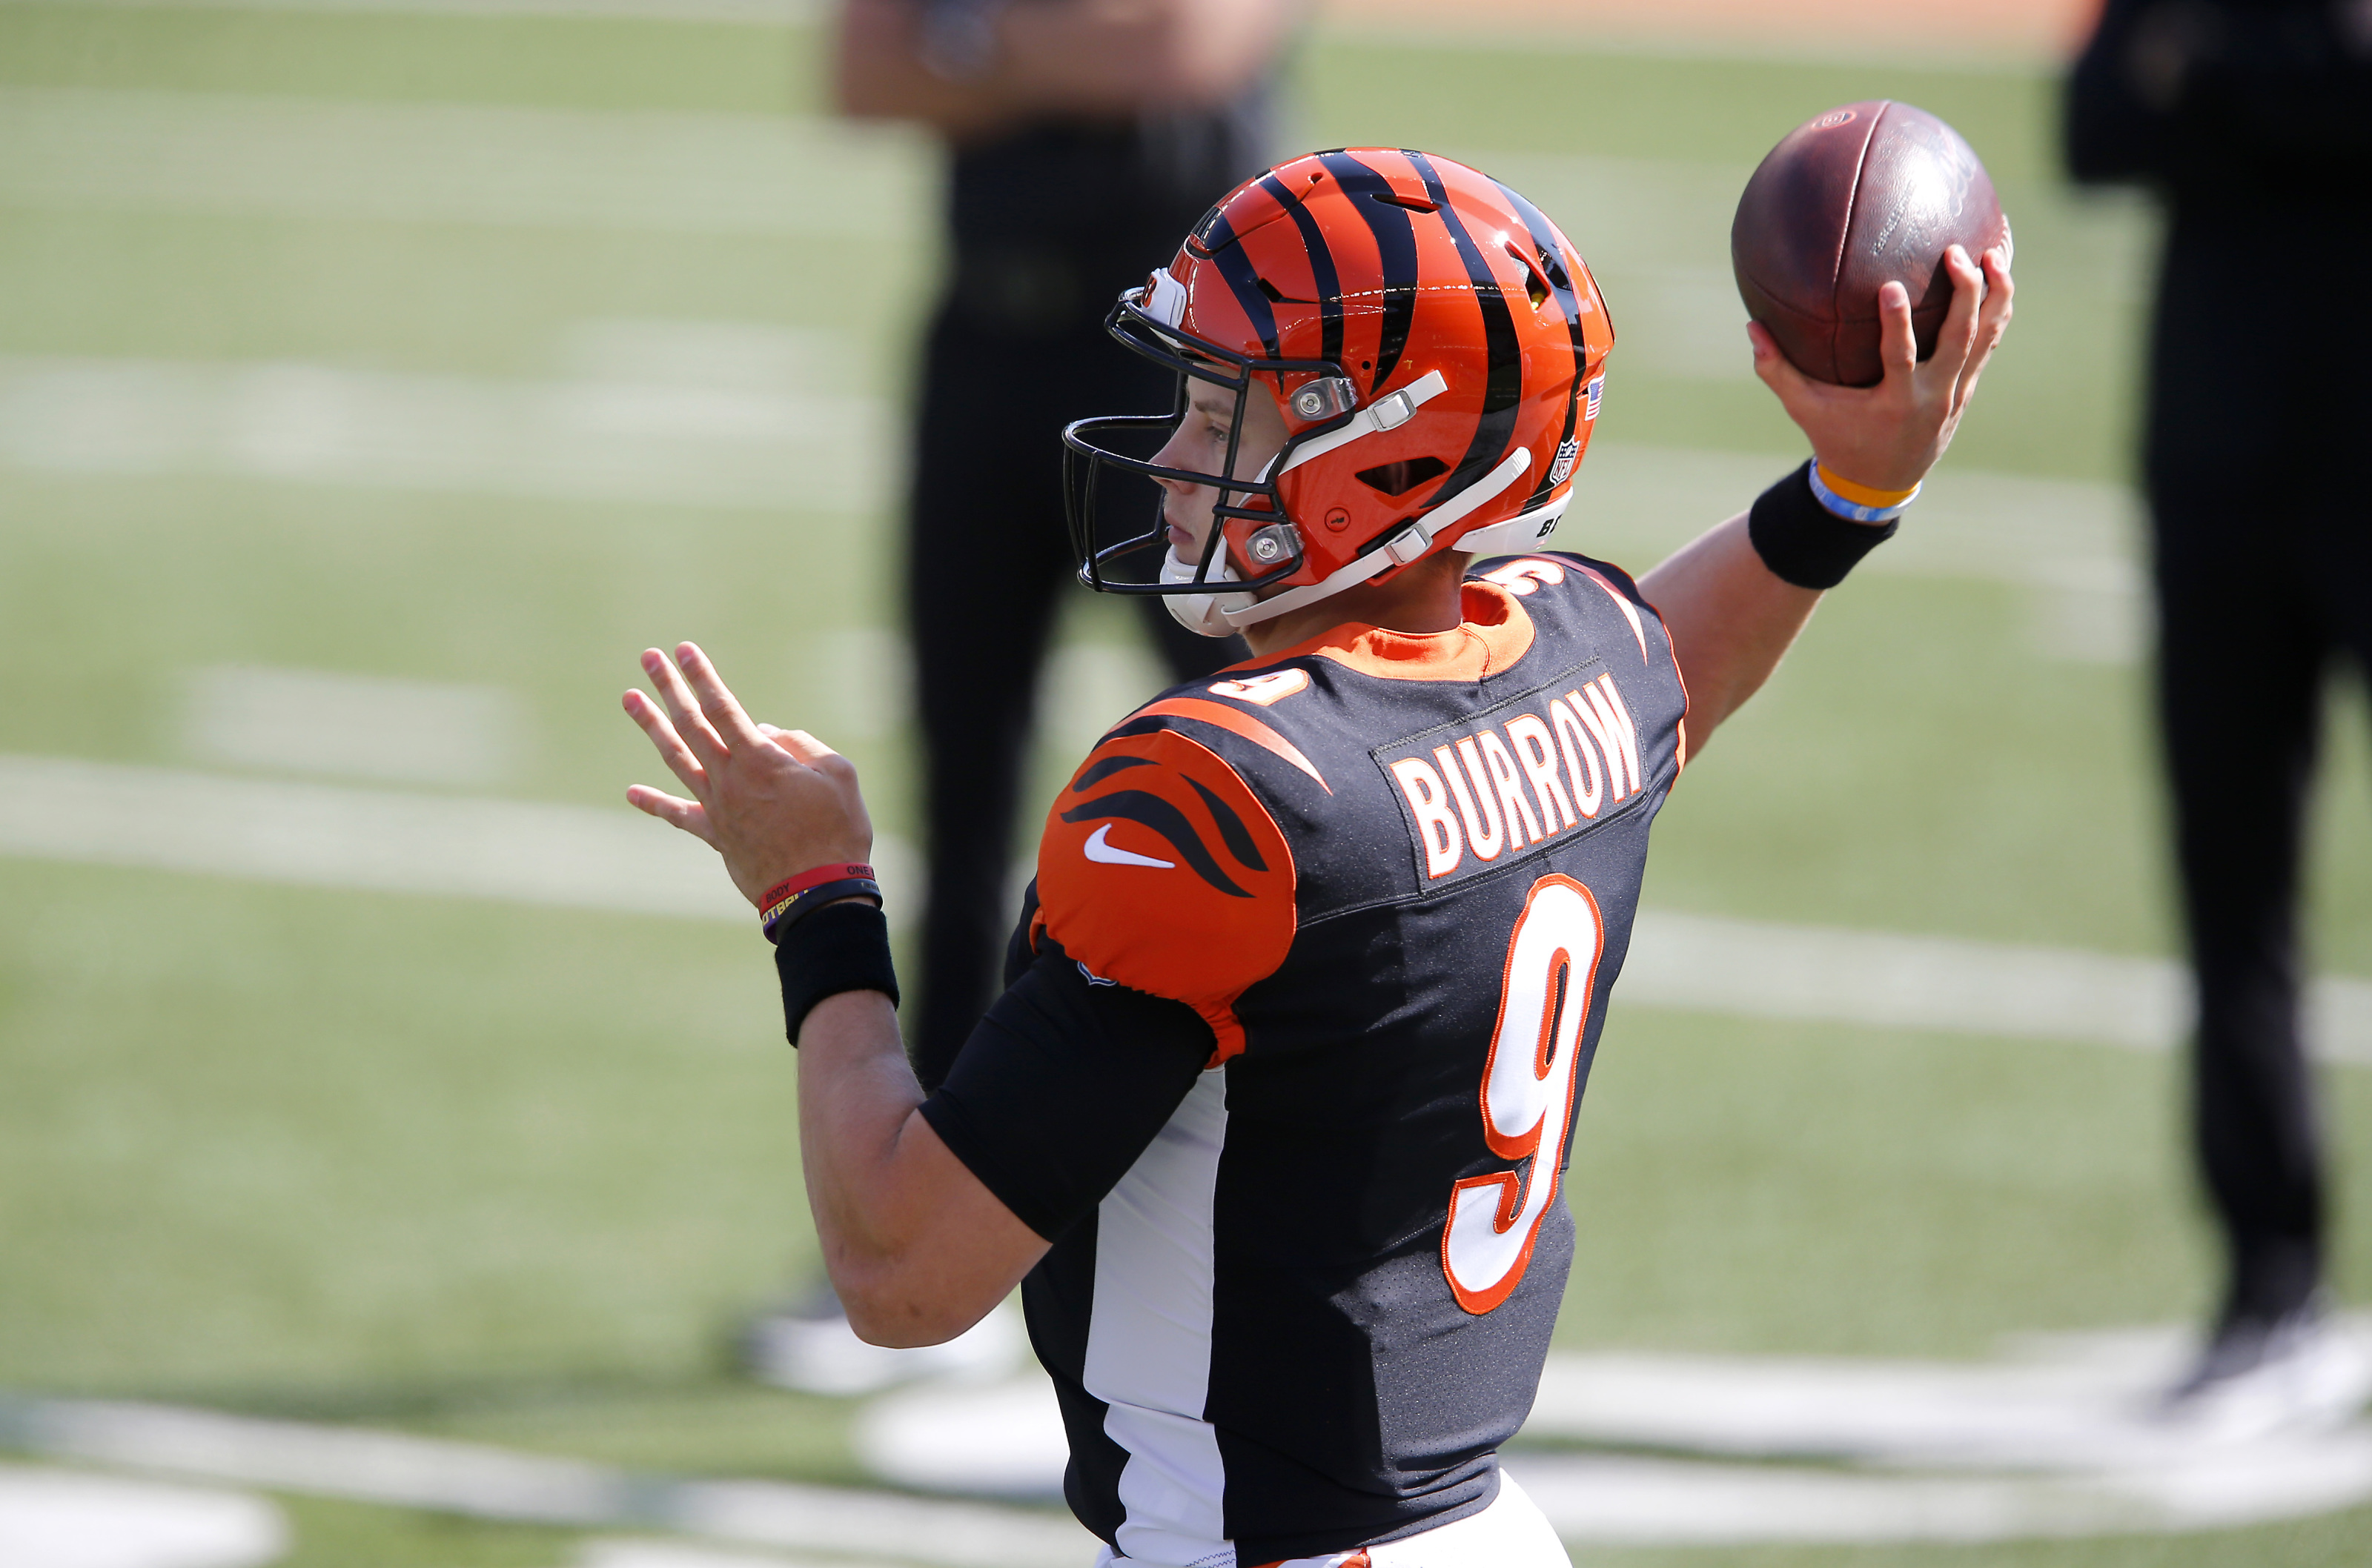 Joe Burrow could have bucked NFL draft system, but QB OK with Bengals